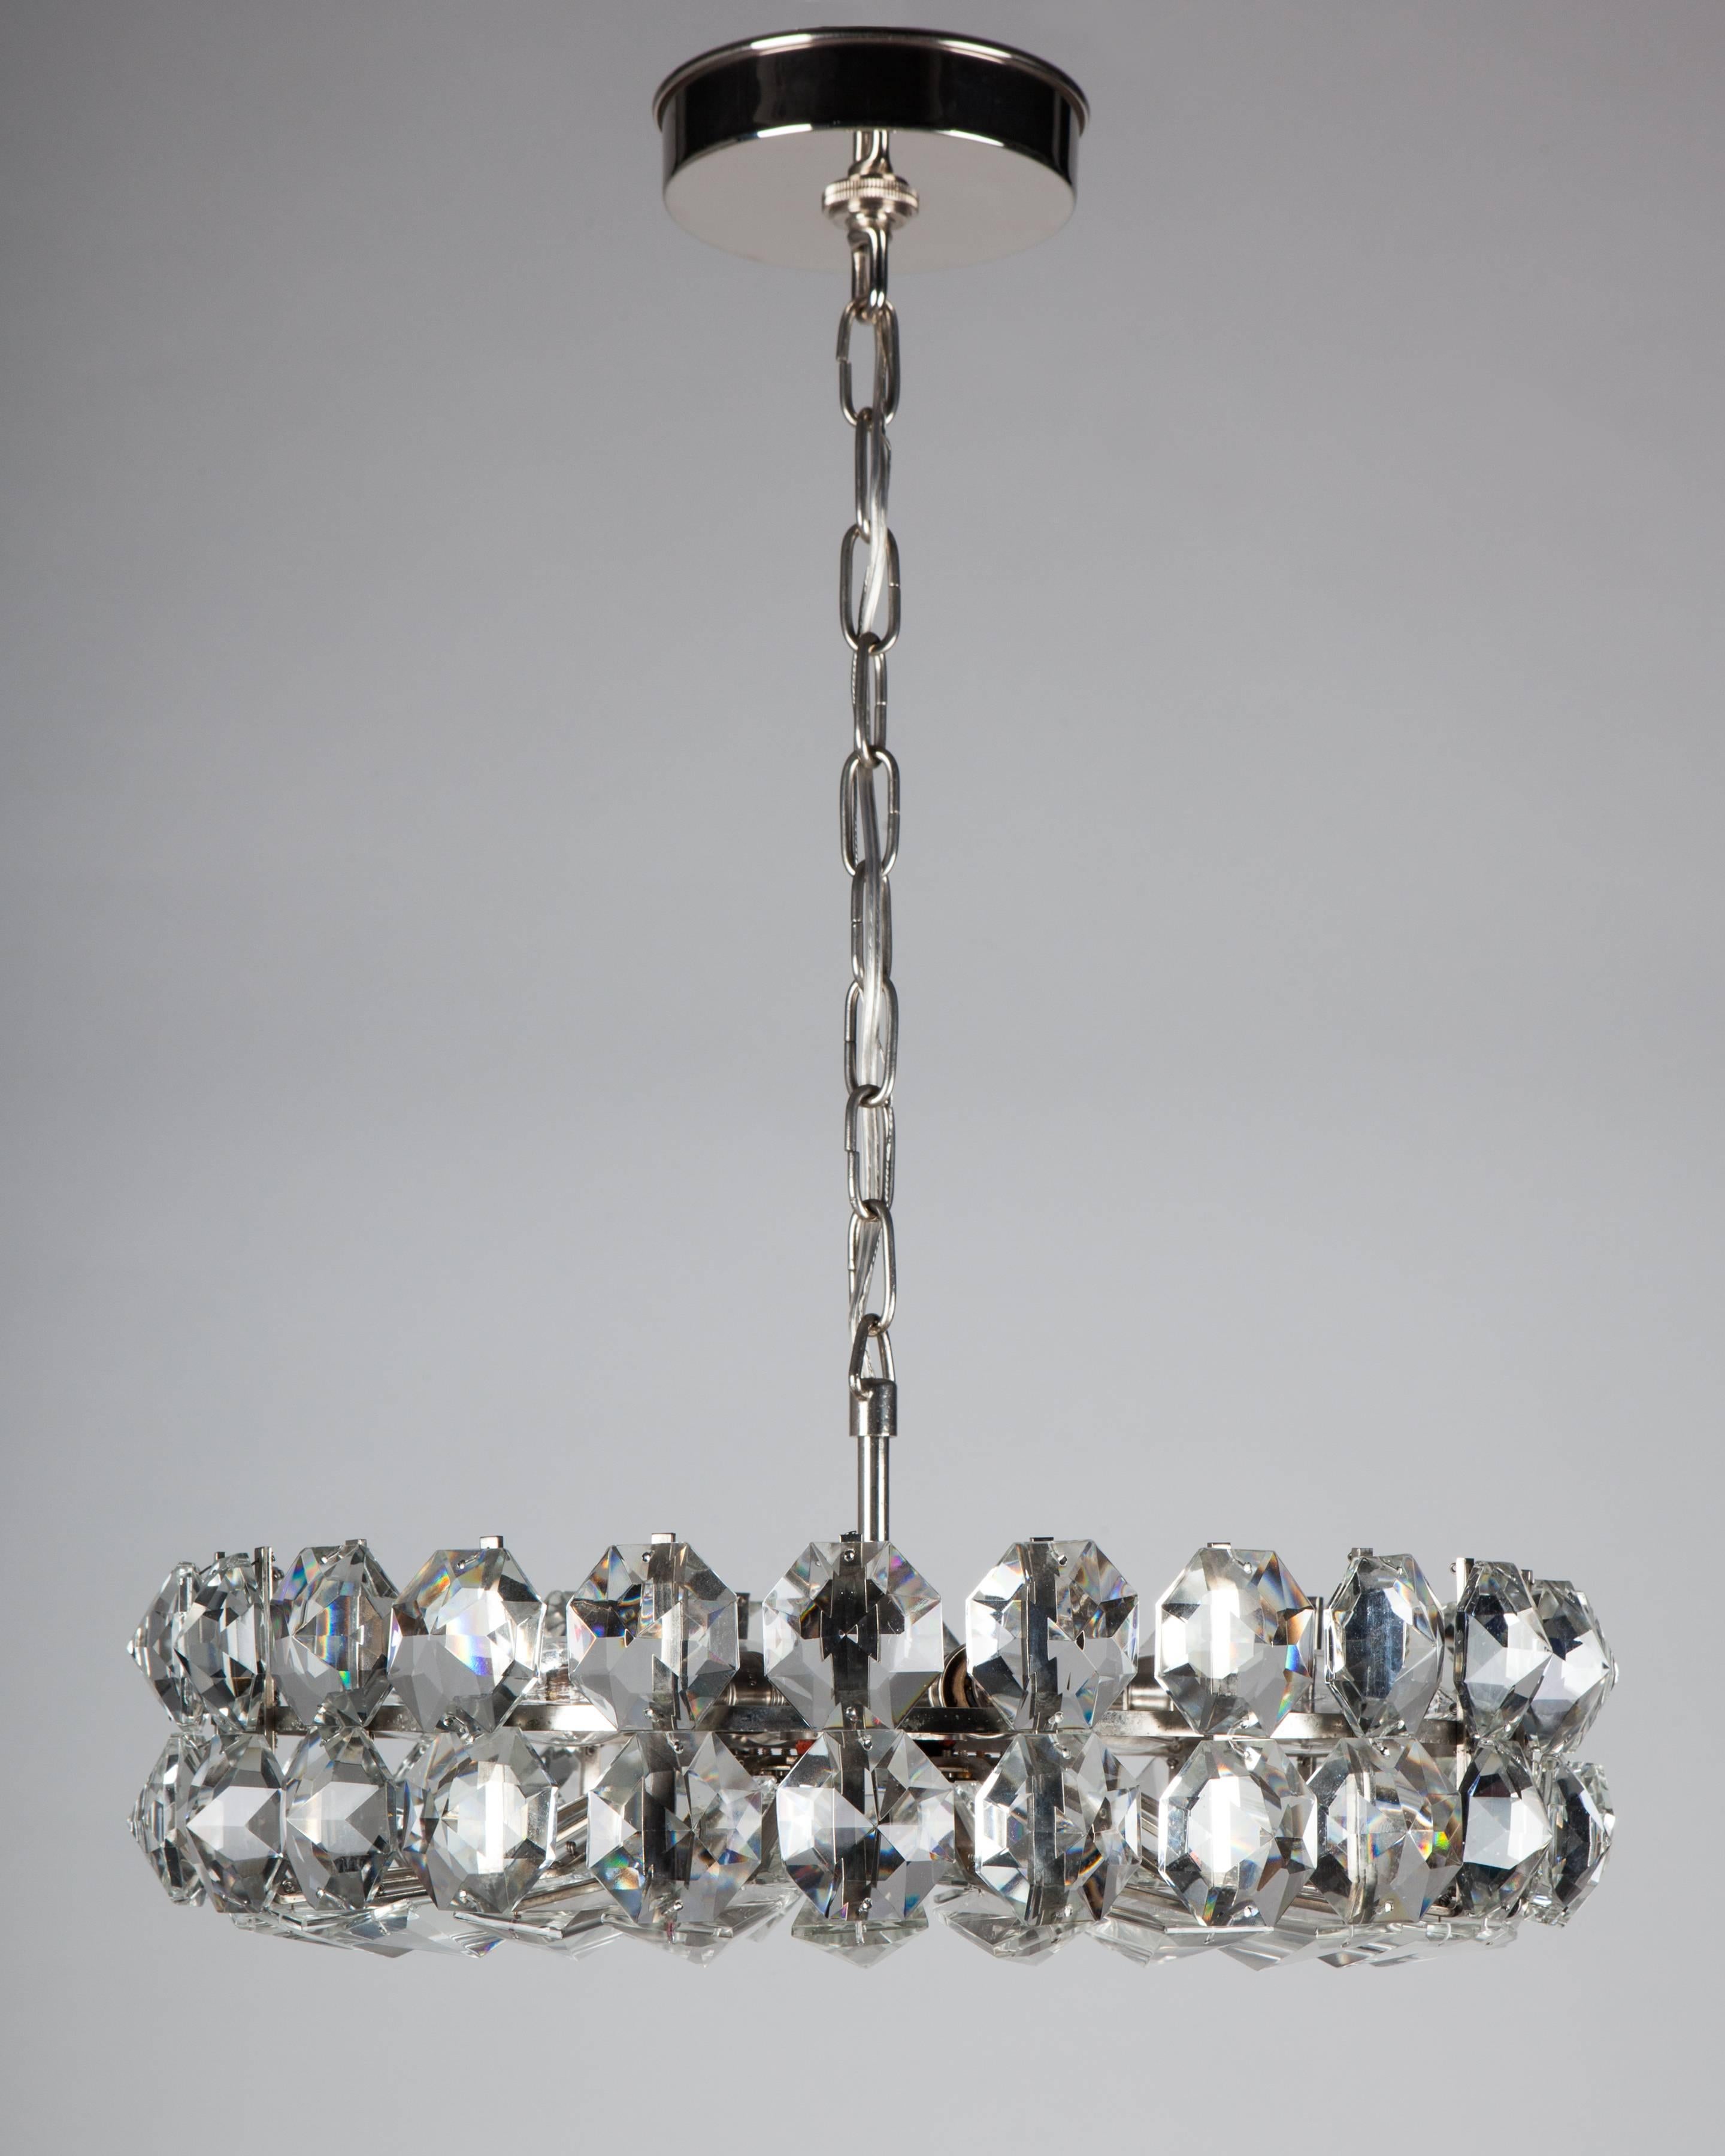 AHL4068
A vintage six-light chandelier with faceted glass crystals on its original aged nickel frame. Attributed to the Austrian maker Bakalowitz & Soehne. Due to the antique nature of this fixture, there may be some nicks or imperfections in the